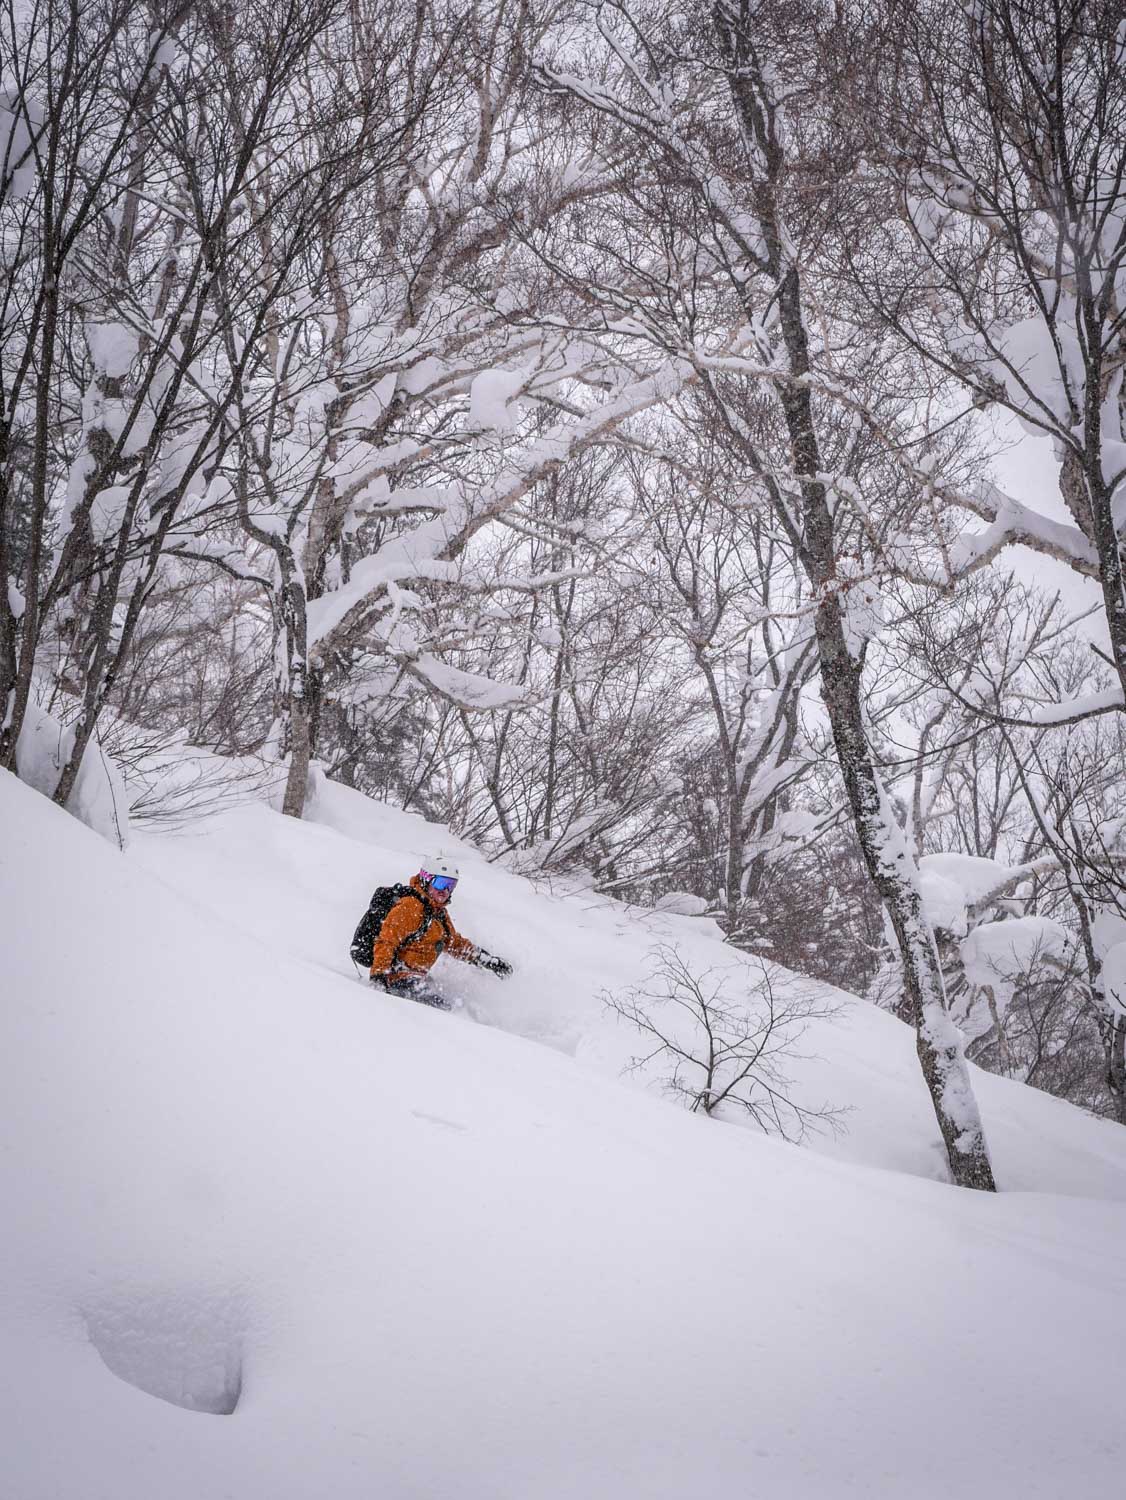 Too much powder for a snowboard in Japan